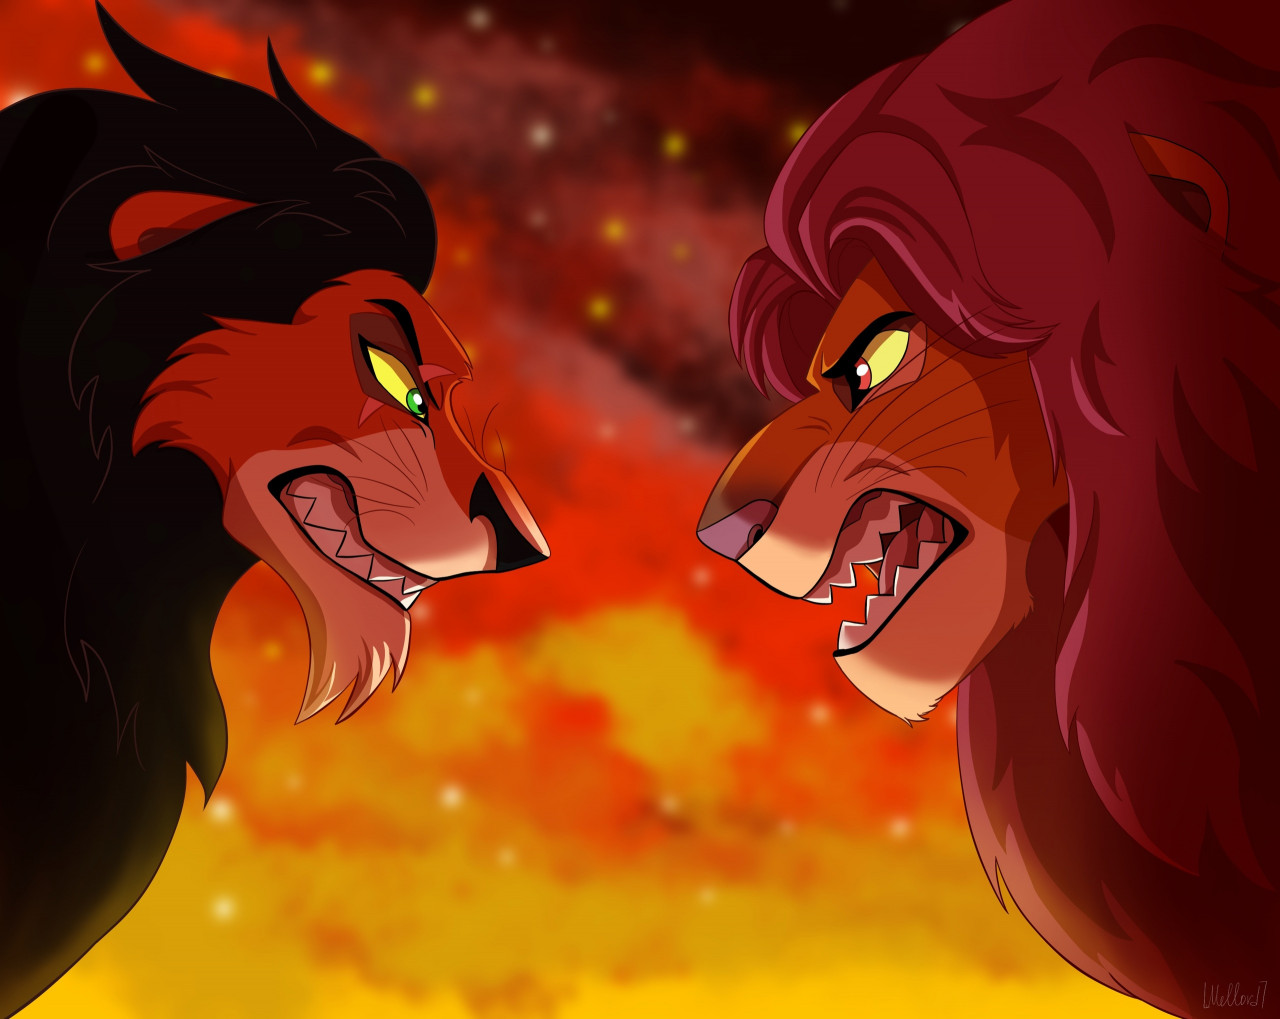 Battle for the pride by Mell0rd -- Fur Affinity dot net